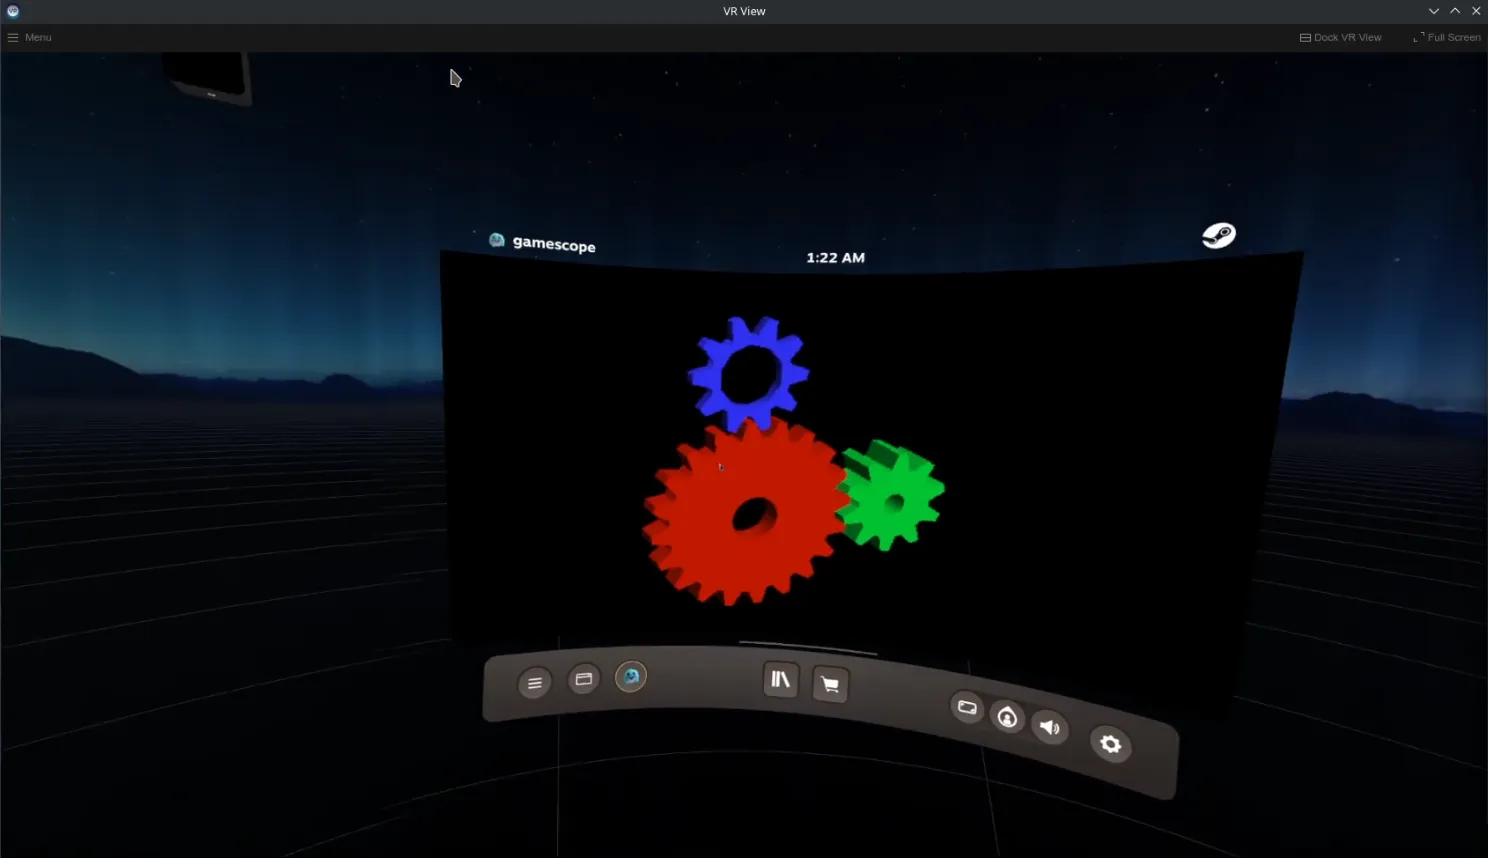 SteamVR's VR view showing glxgears running inside an overlay.